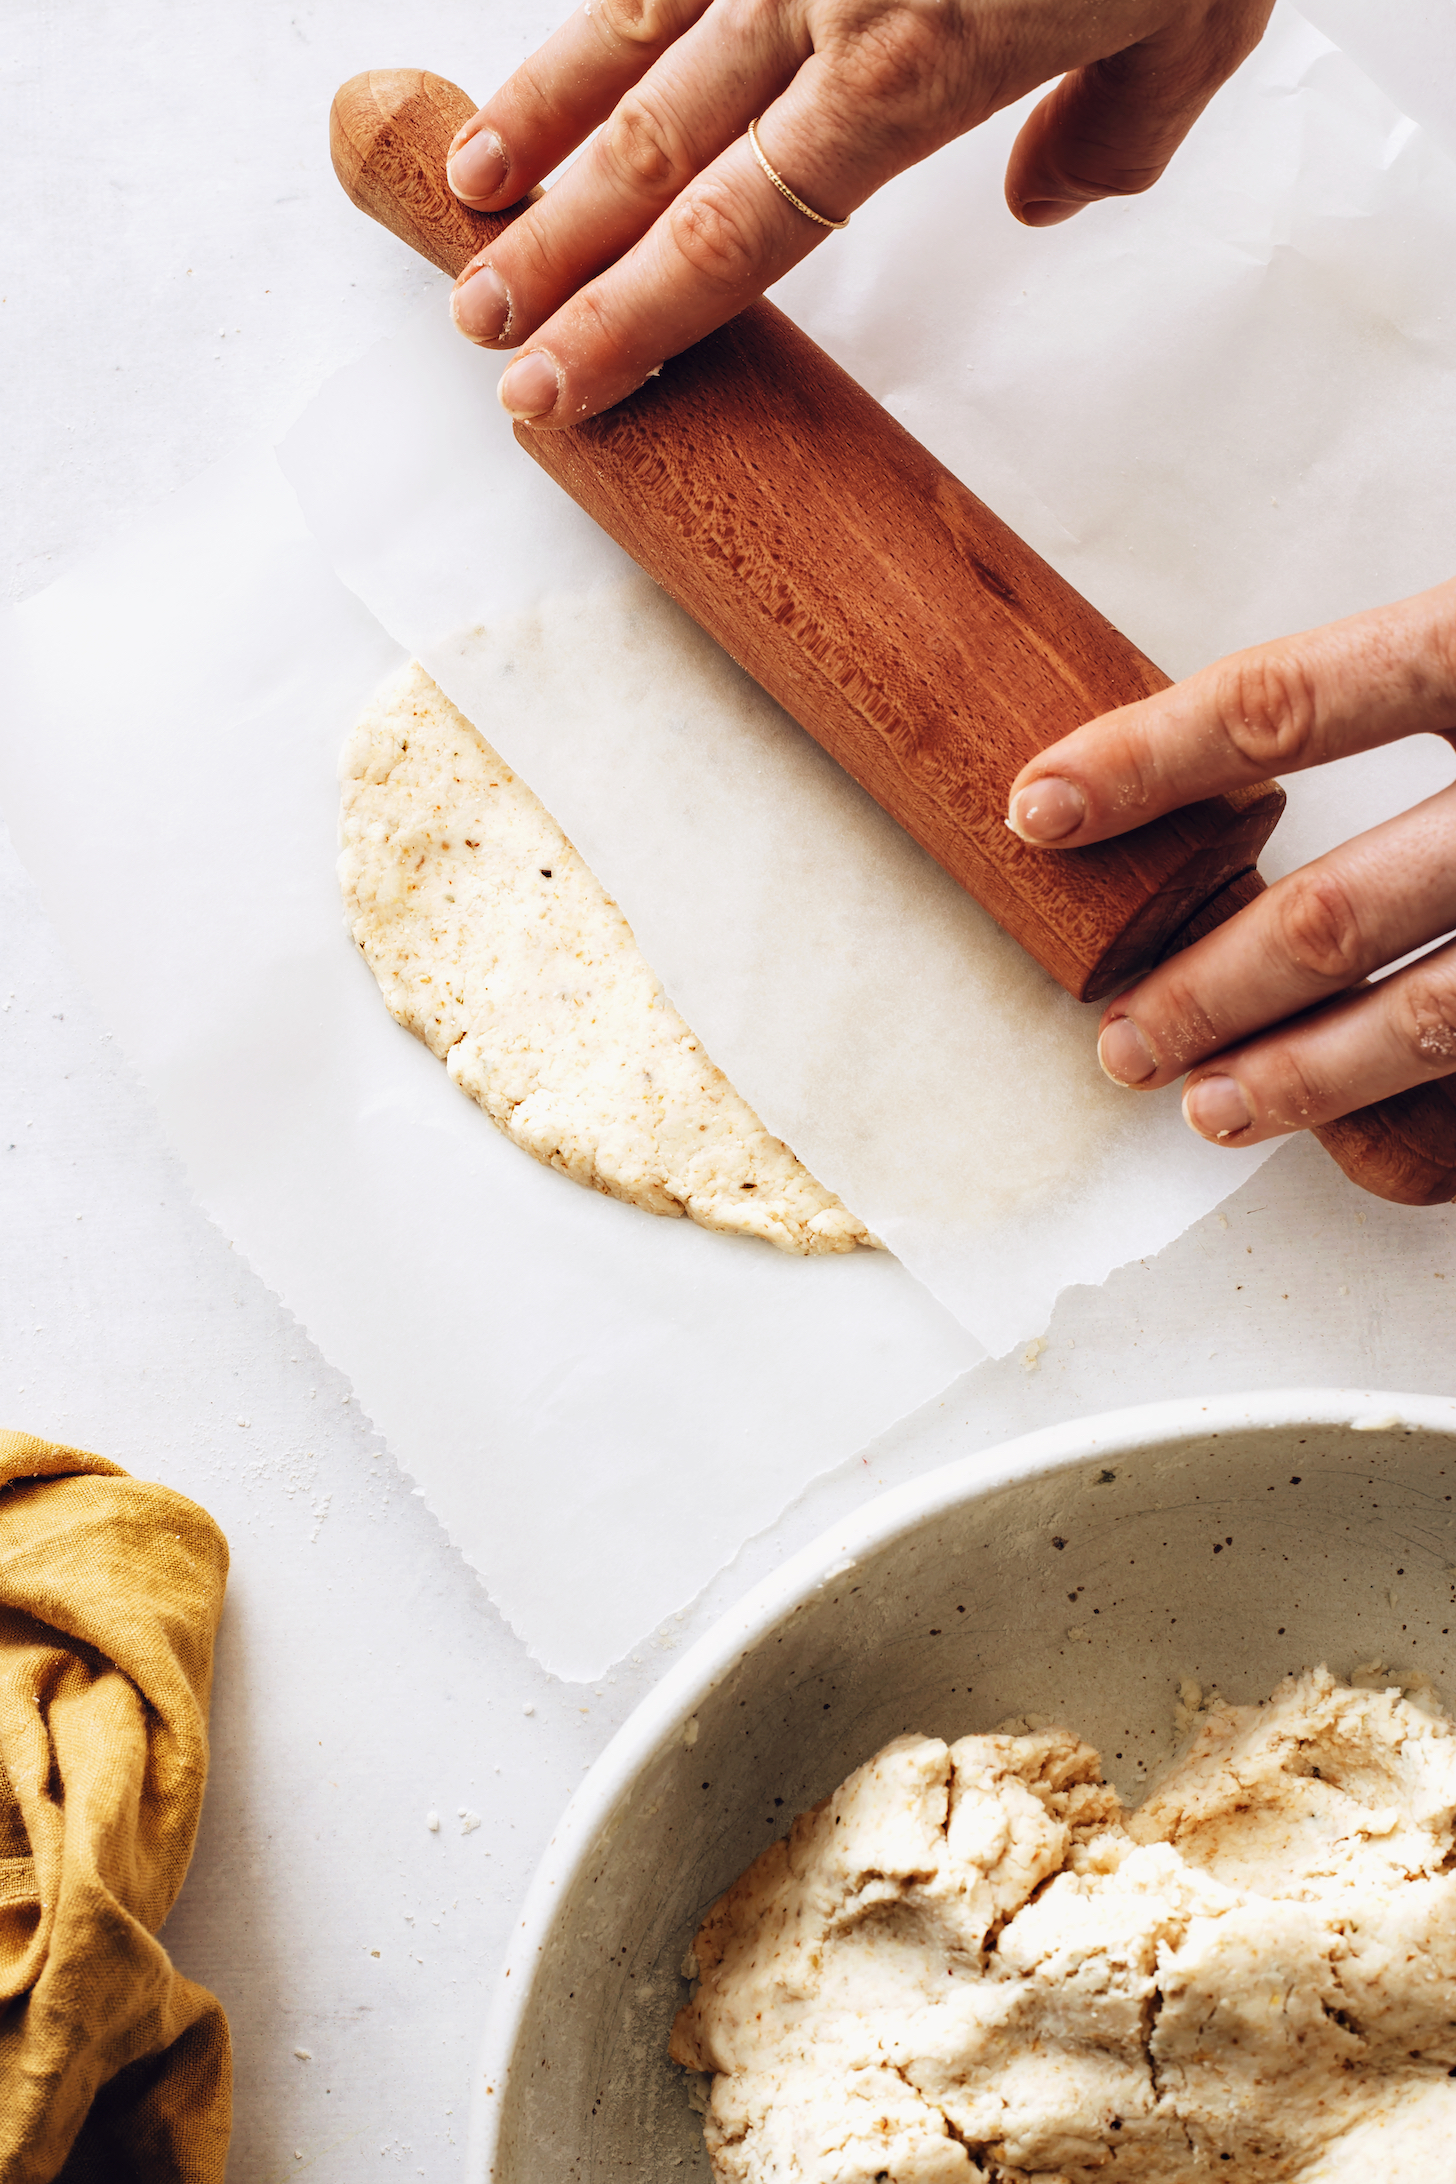 Using a rolling pin to roll out gluten-free flatbread